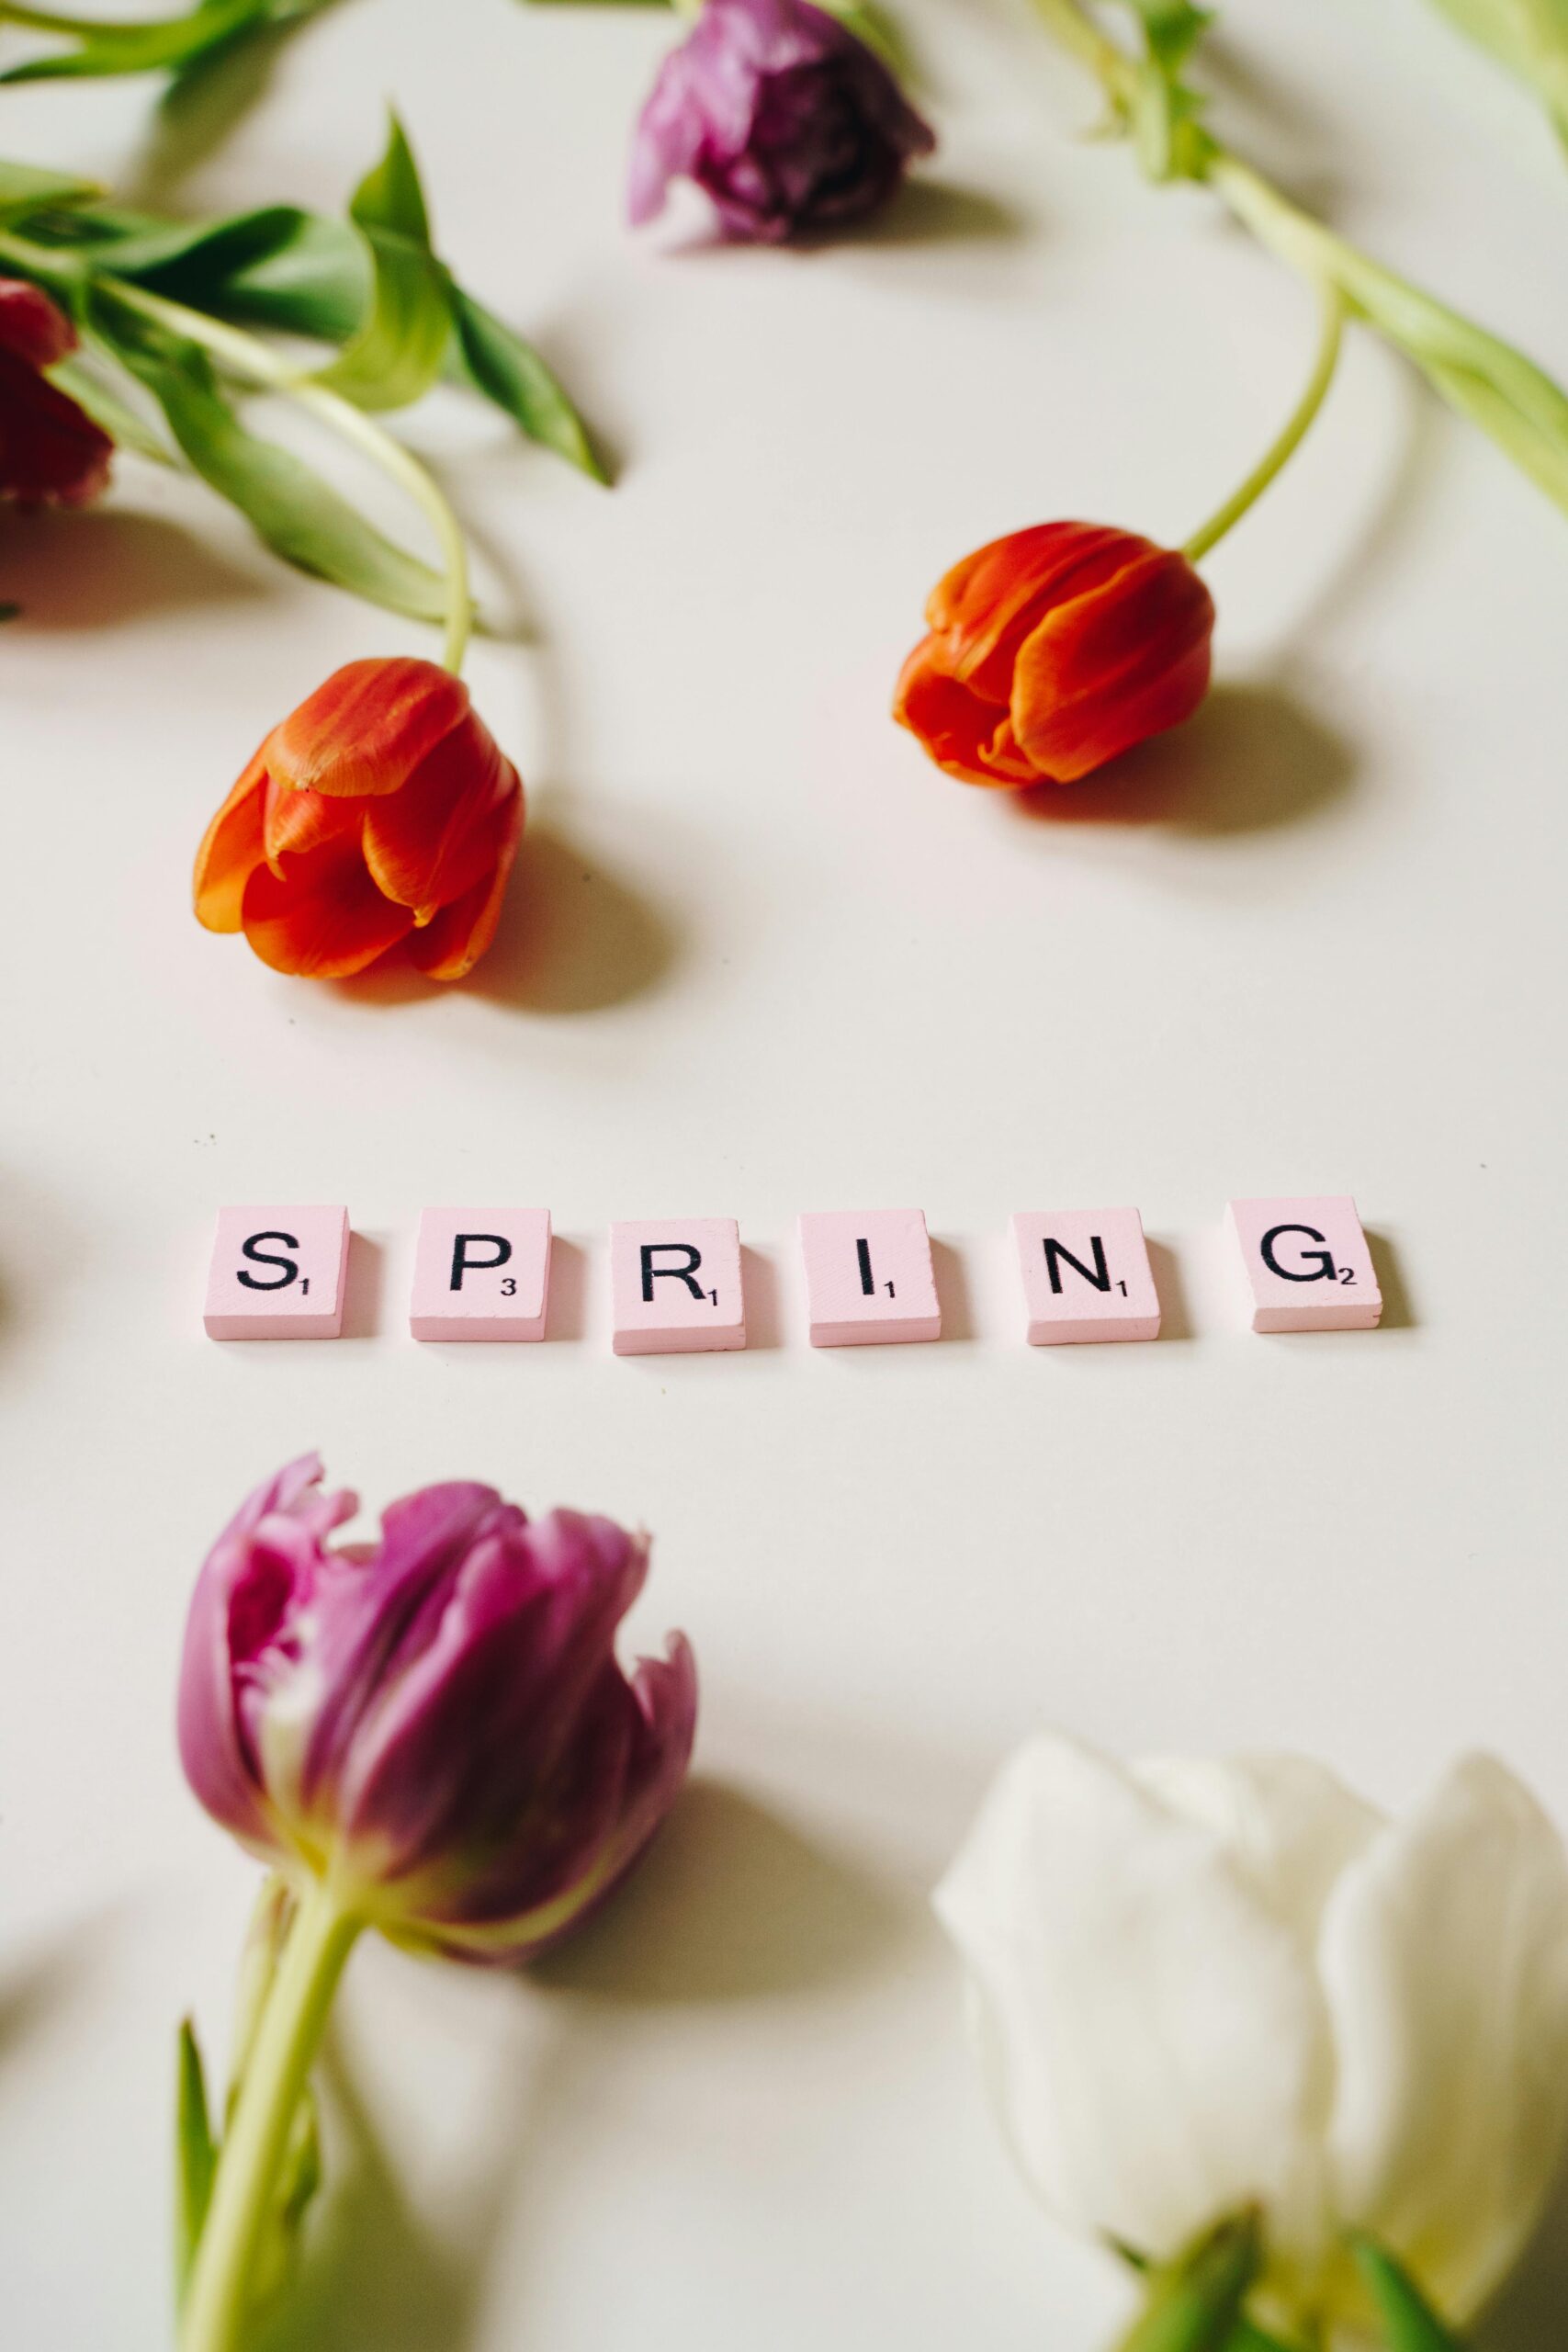 Top 5 Spring Outdoor Activities to Embrace the Season